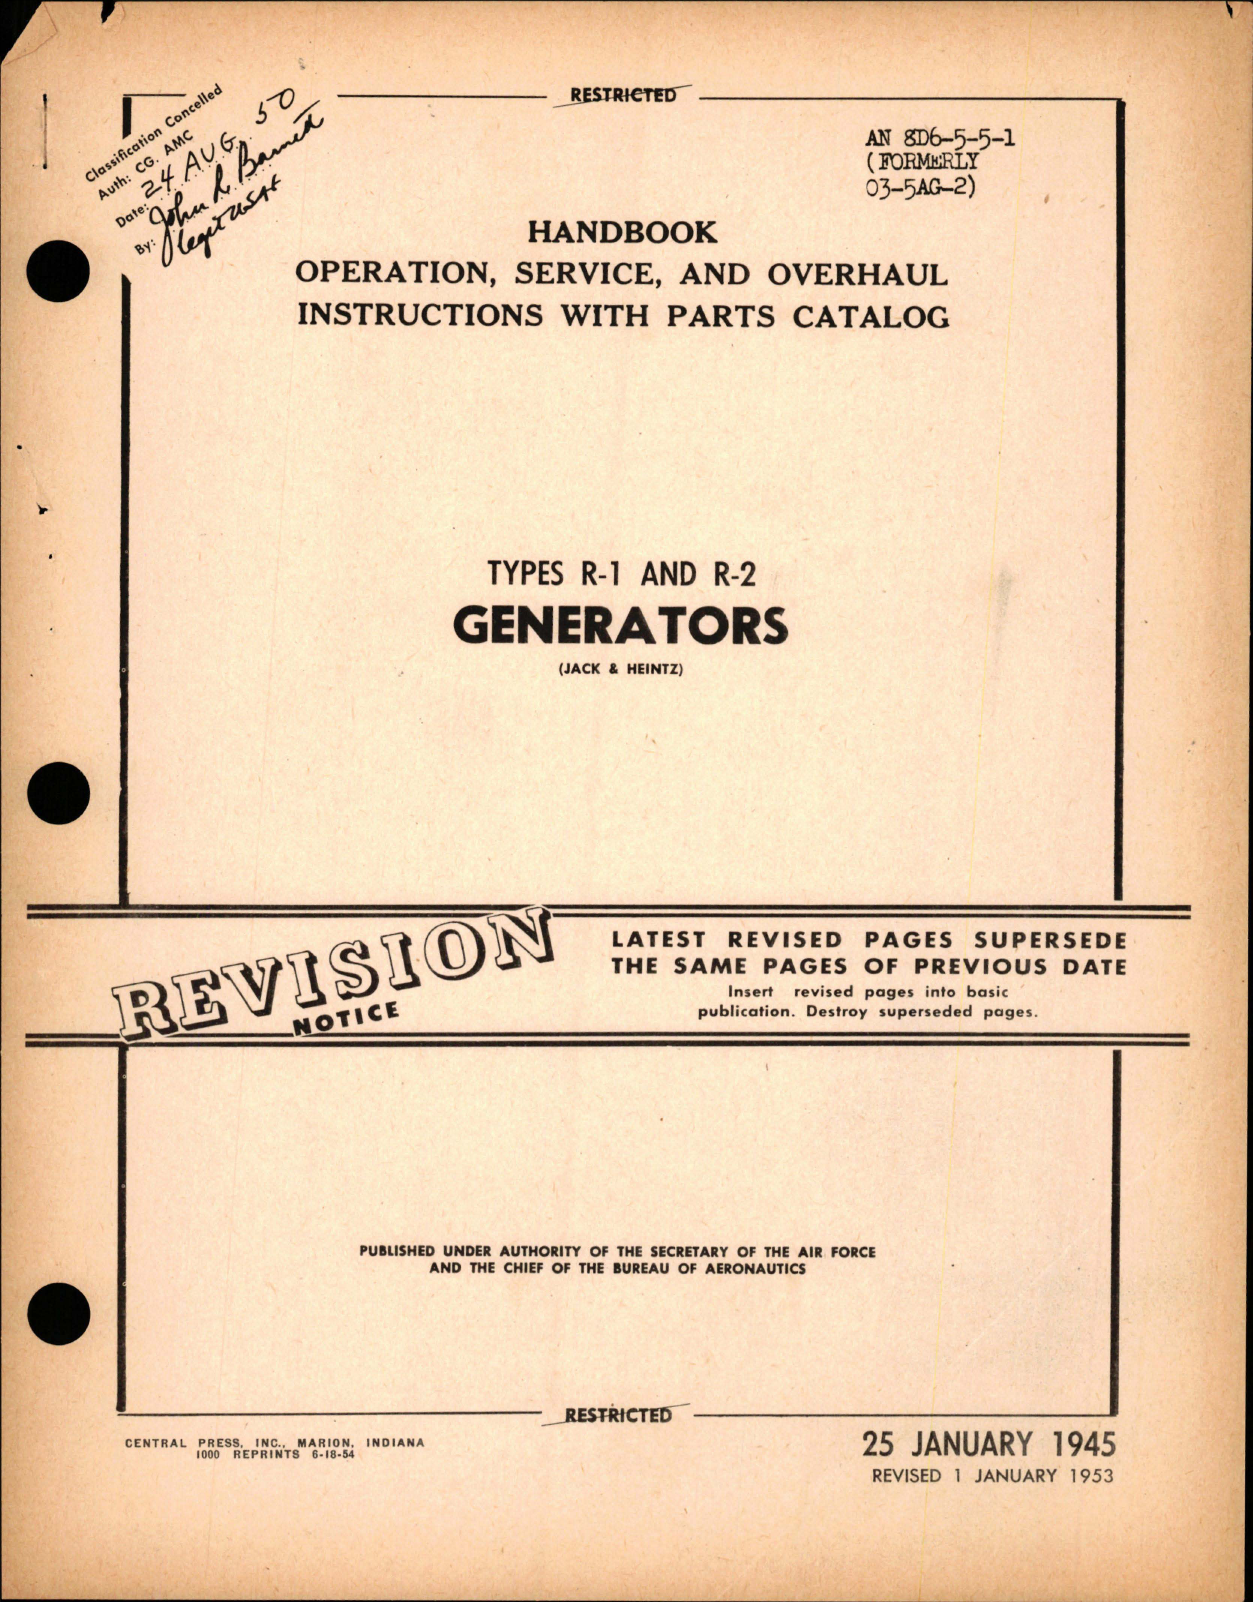 Sample page 1 from AirCorps Library document: Operation, Service and Overhaul Instructions with Parts Catalog for Generators - Types R-1 and R-2